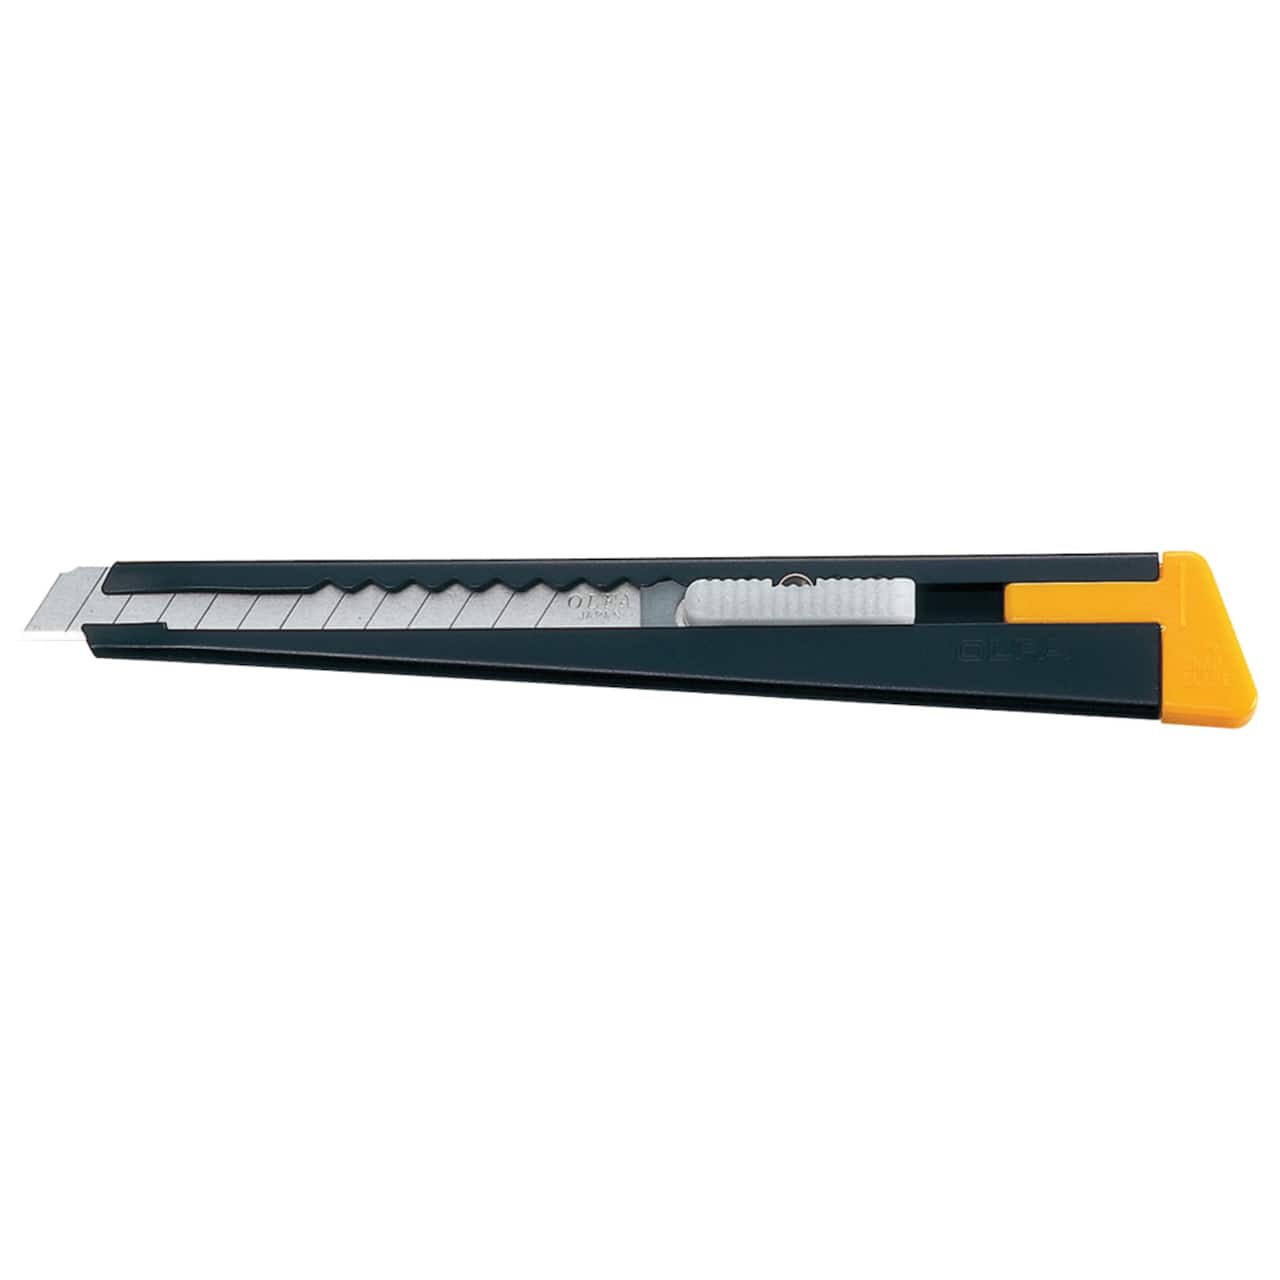 Olfa® Multi-Purpose Utility Knife with Snap Off Blades